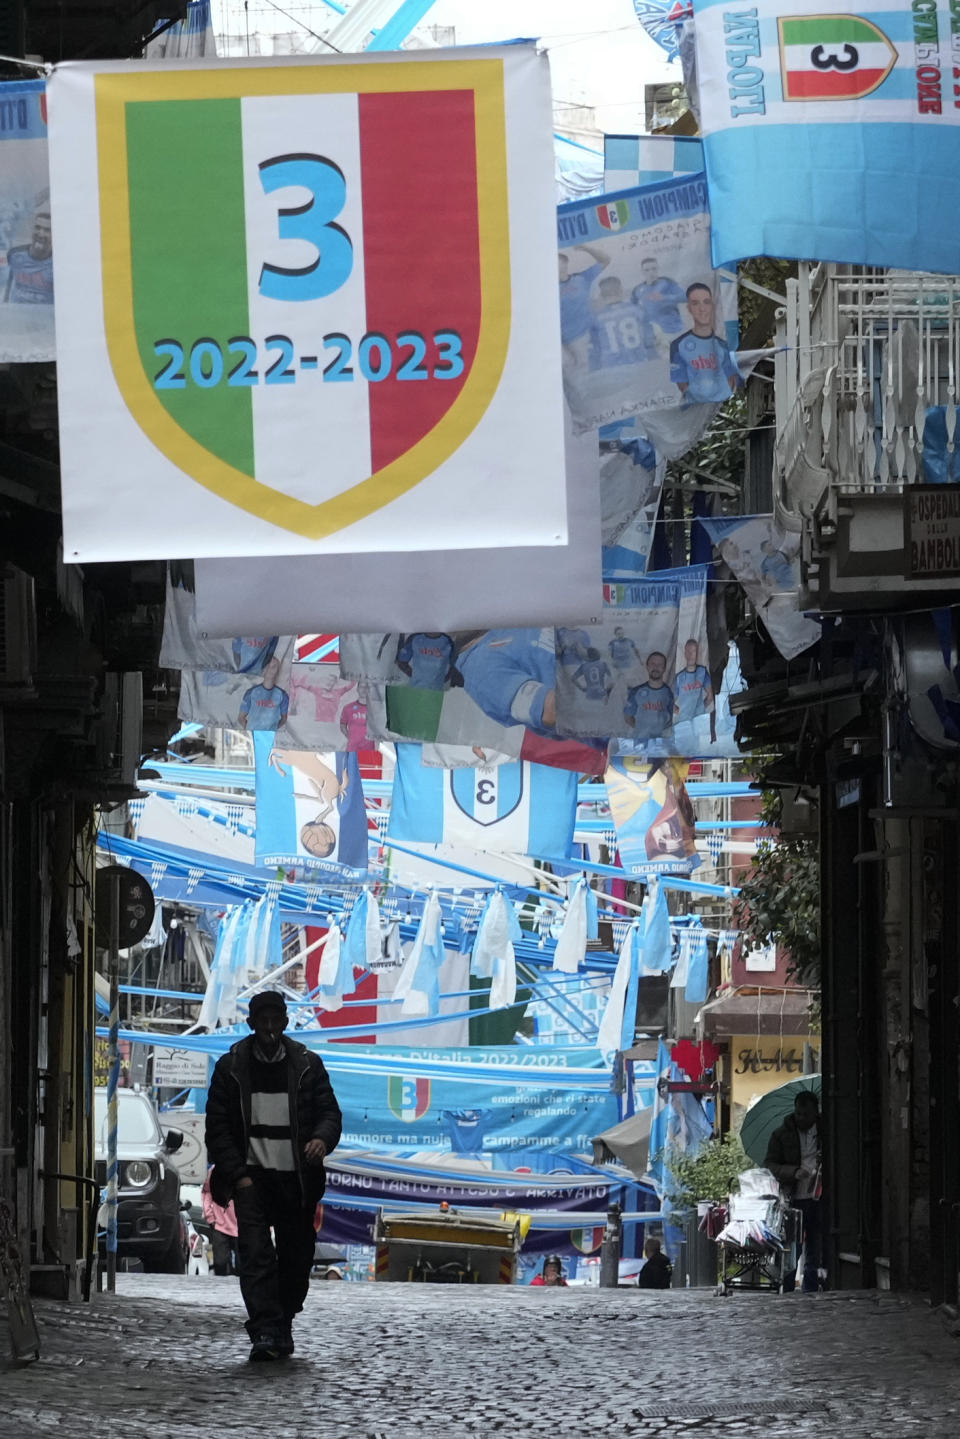 A man walks in a street adorned with Napoli soccer team flags in Naples, Italy, Monday, May 1, 2023. Napoli wasted what seemed like a perfect chance to seal the Serie A title, at home inside the Stadio Diego Armando Maradona on a holiday weekend afternoon in a 1-1 draw with regional rival Salernitana on Sunday. The result disappointed legions of Napoli fans who had already started celebrating in anticipation of the championship. (AP Photo/Gregorio Borgia)